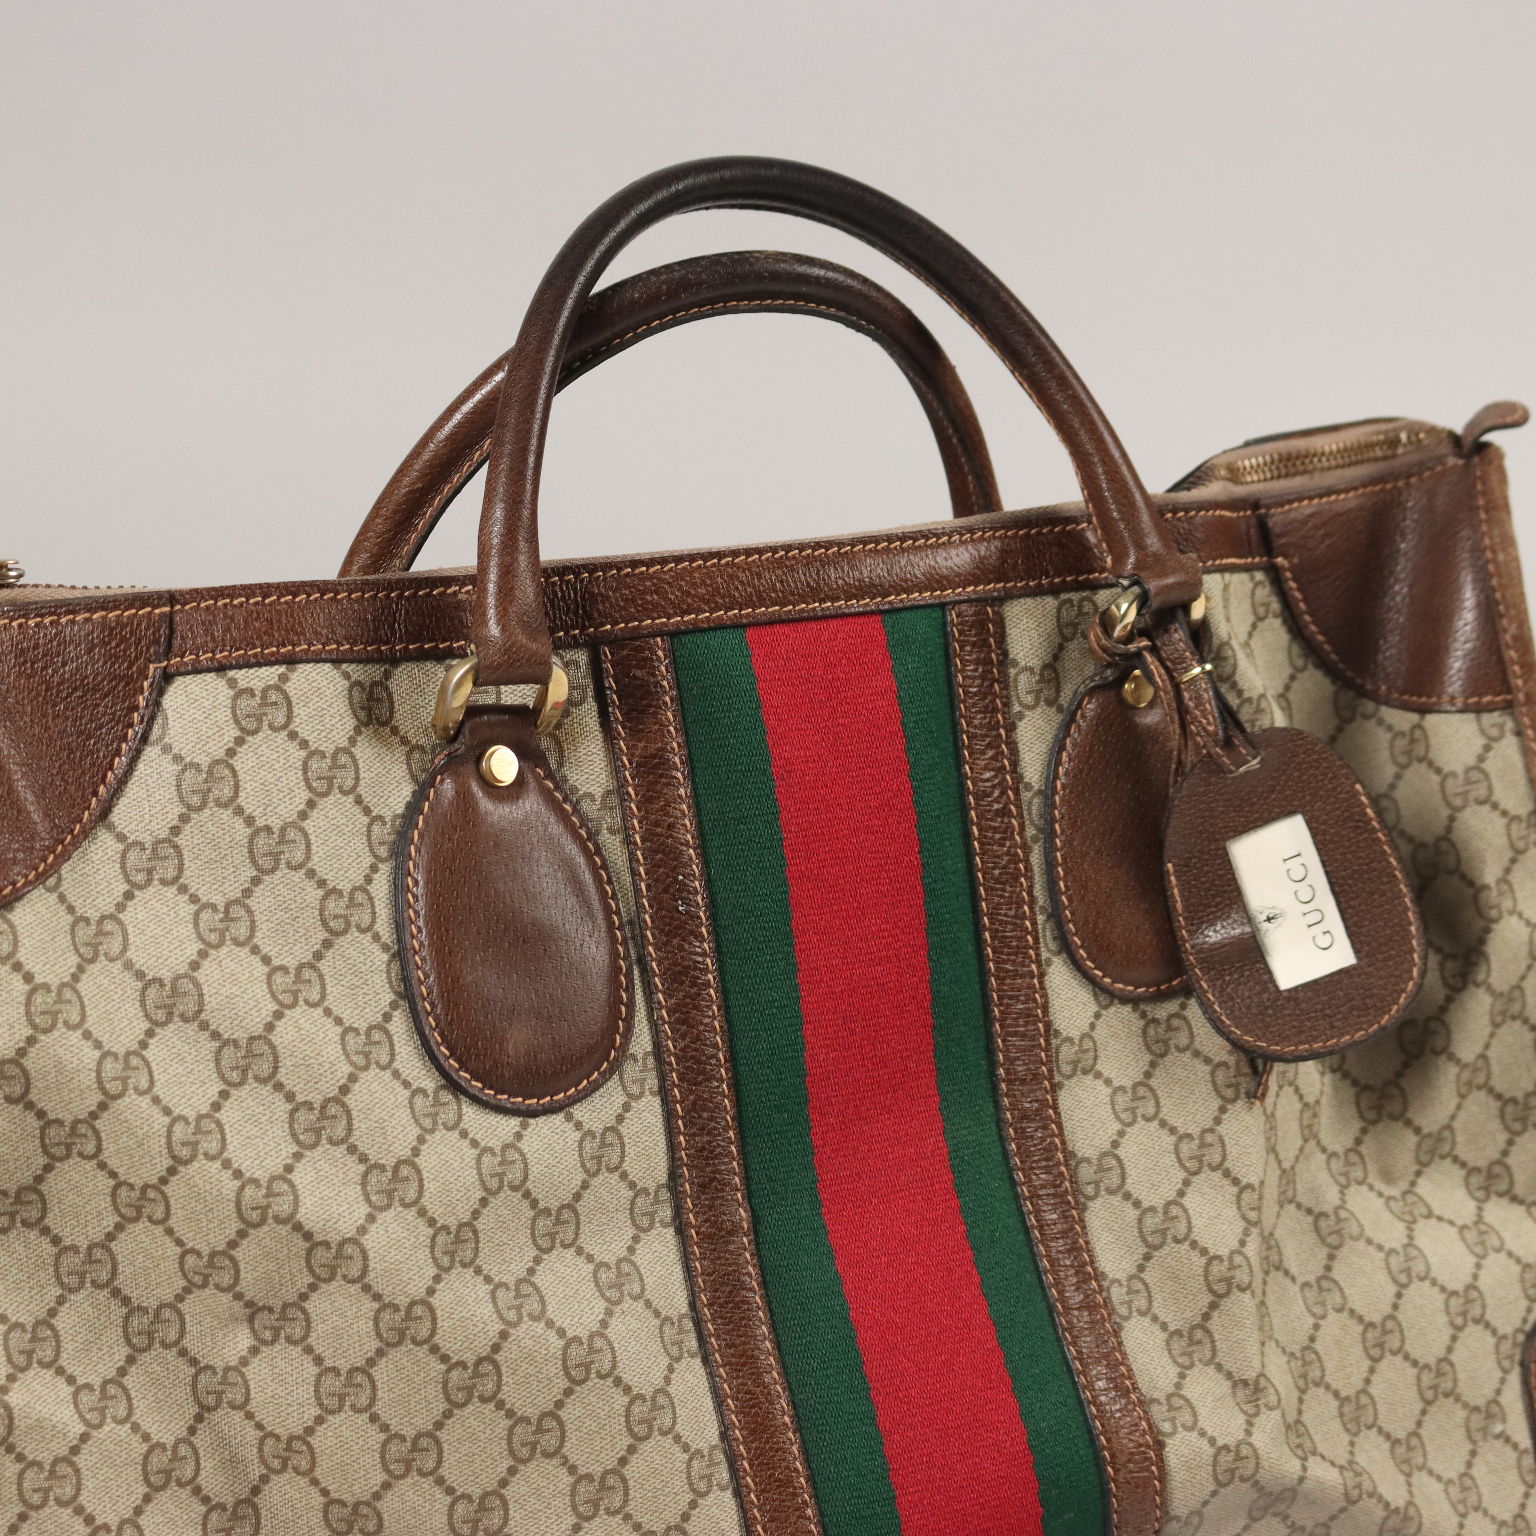 Gucci Bag Leather Italy 1970s, Clothing & House Linens, Vintage